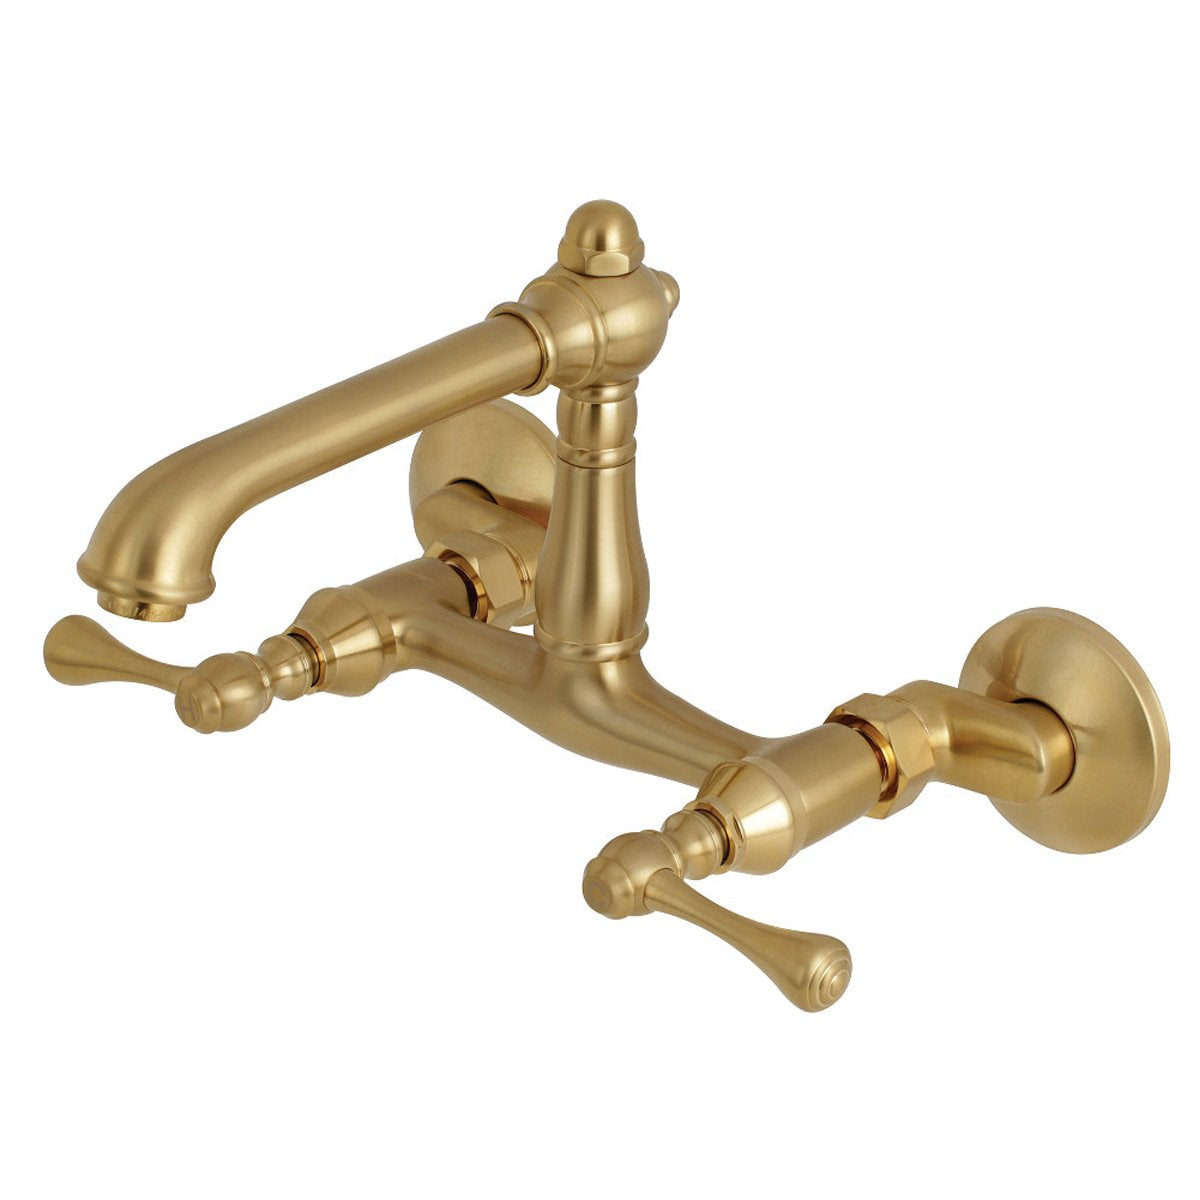 Kingston Brass English Country Wall Mount 6-Inch Adjustable Center Kitchen Faucet